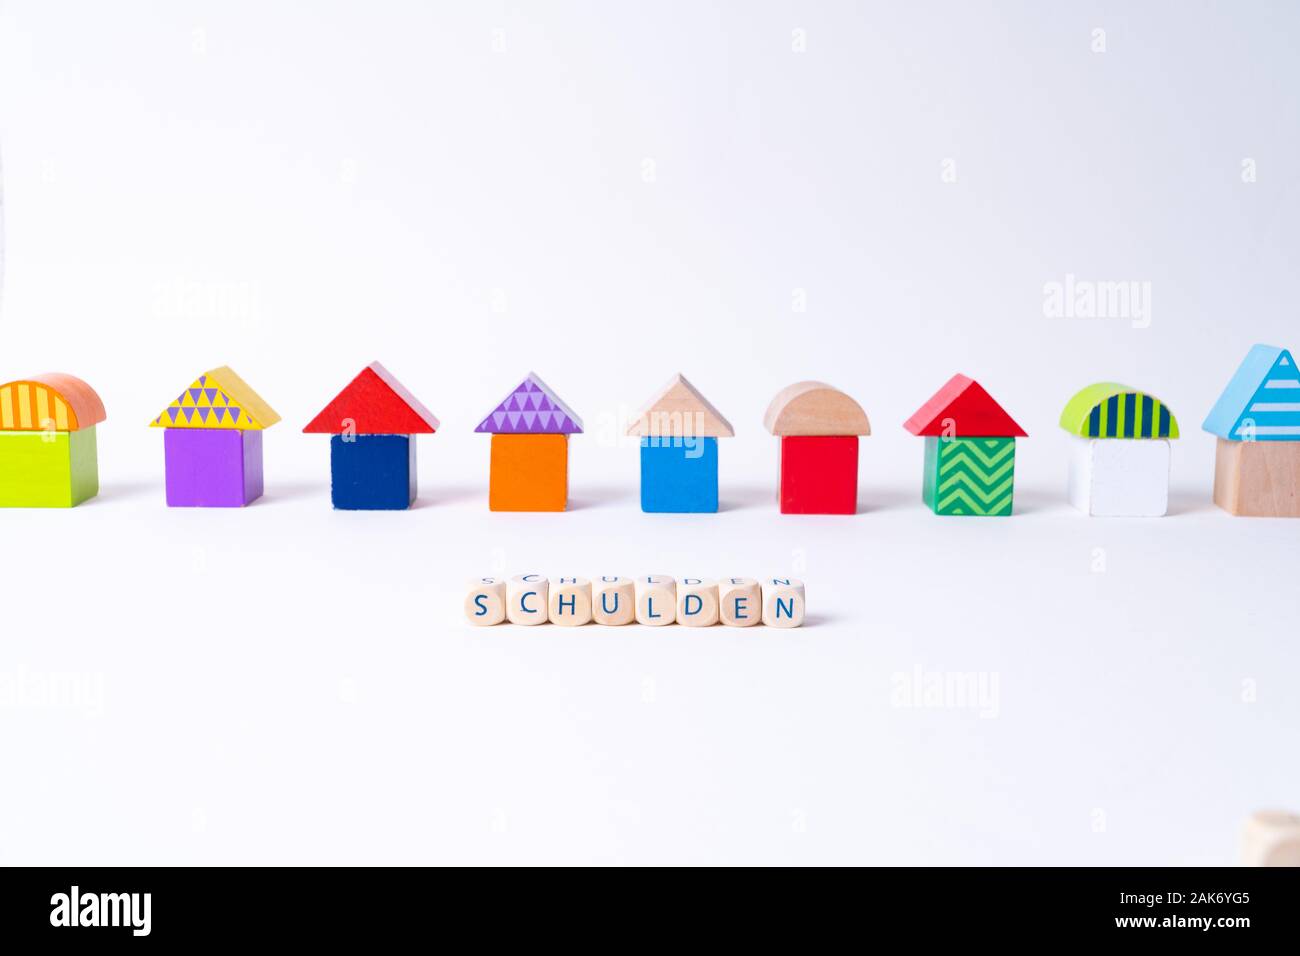 Cubes with letters saying 'Schulden', the German word for debt in front of a row of houses built of toy colorful toy blocks Stock Photo